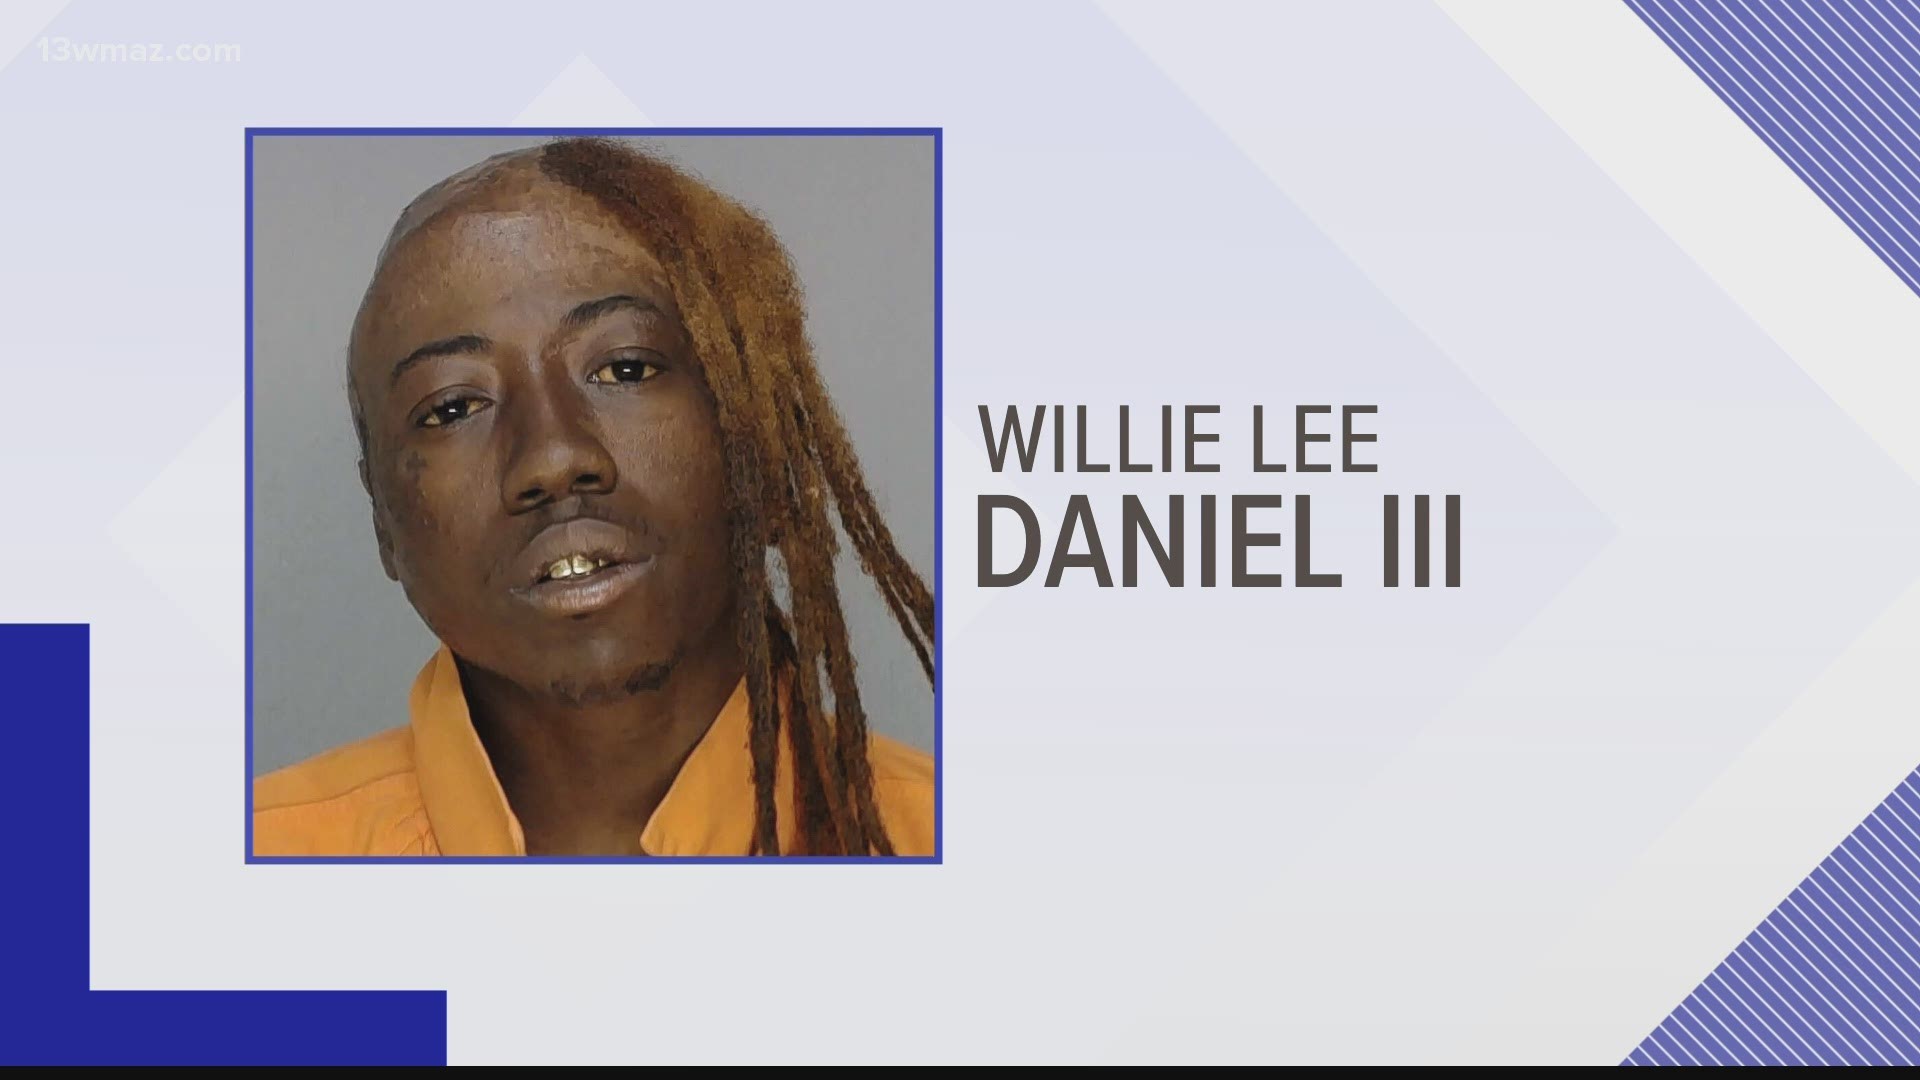 34-year-old Willie Lee Daniels was arrested and charged with Murder, Aggravated Assault, and a Probation Violation Superior Court.